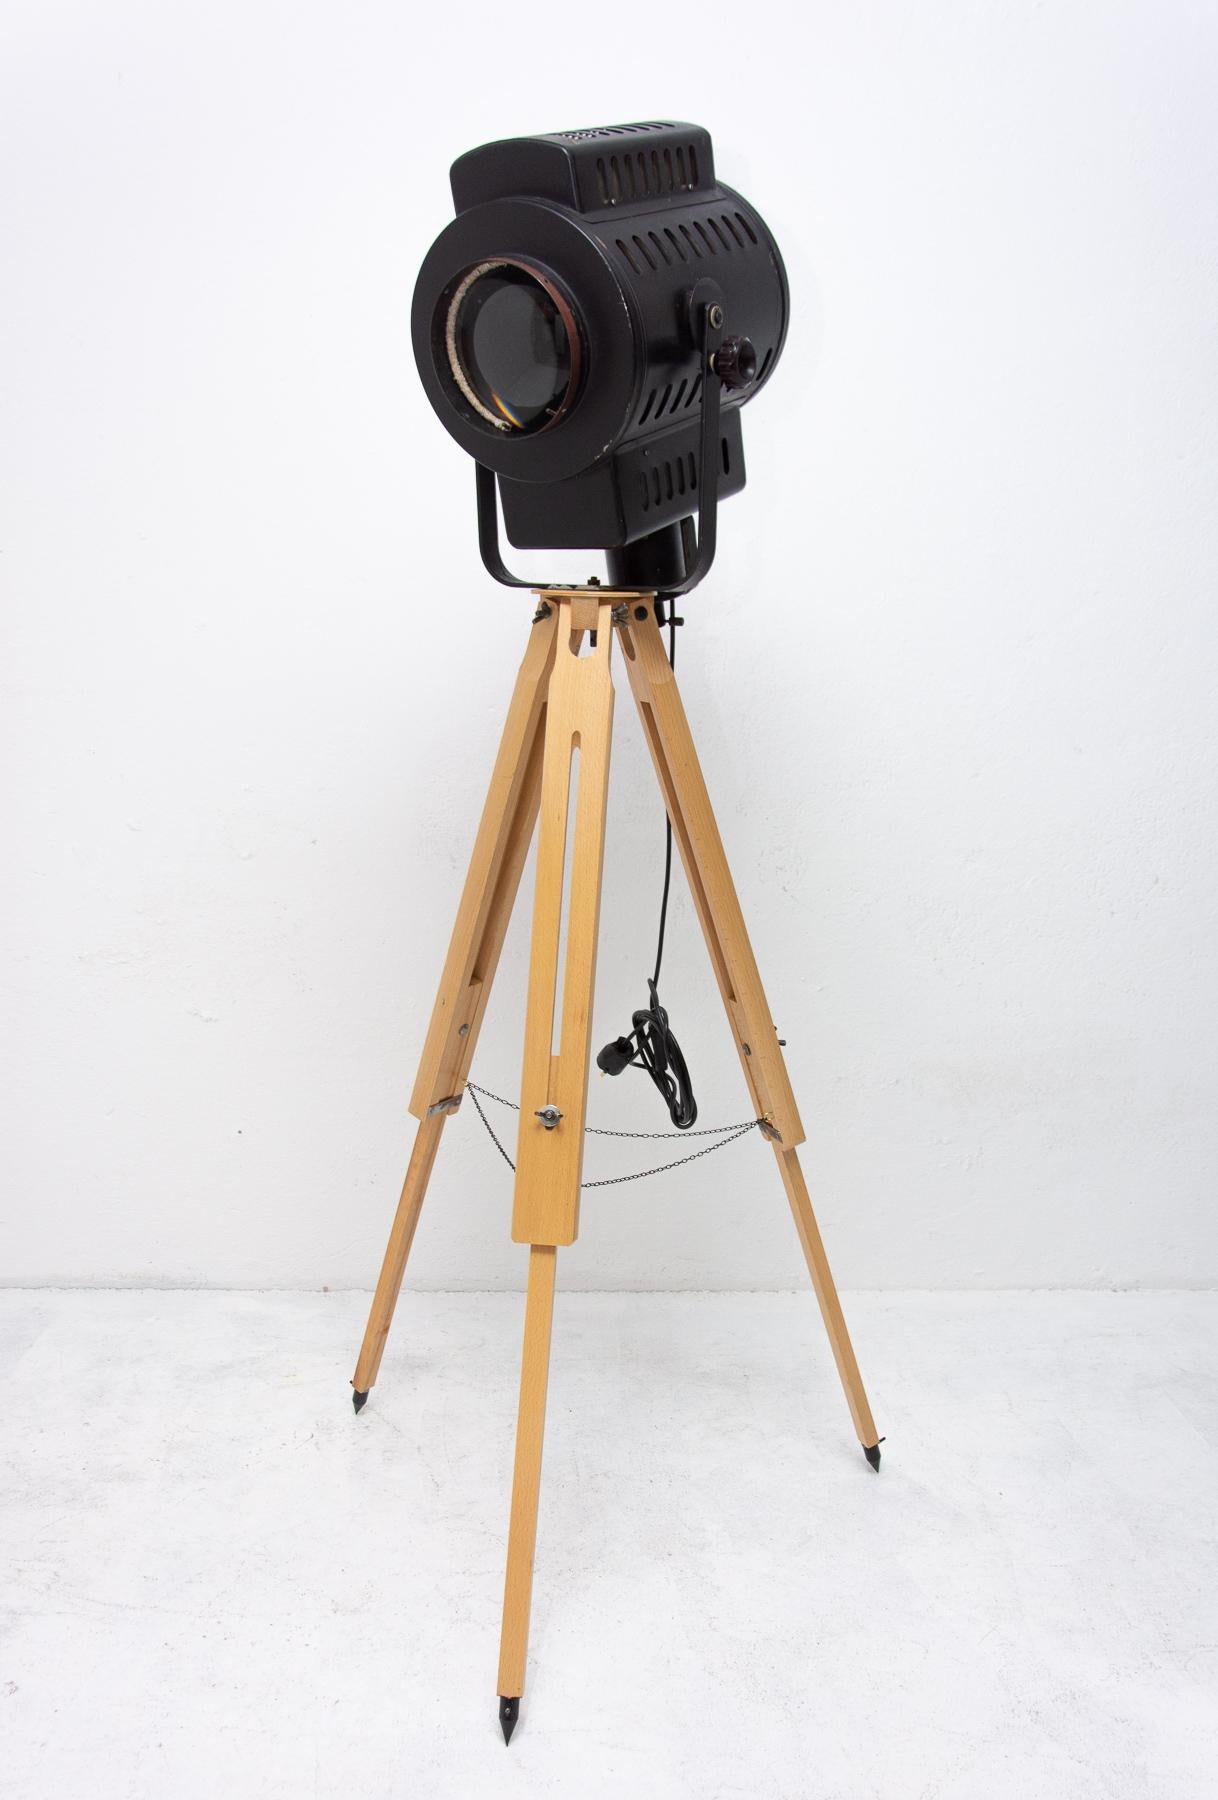 Vintage Industrial spotlight on a wooden tripod. It was made in the former Czechoslovakia in the 1970s. It features an original large rounded shade. Provides a high level of lighting. An outstanding and attractive model. To be used for theatre